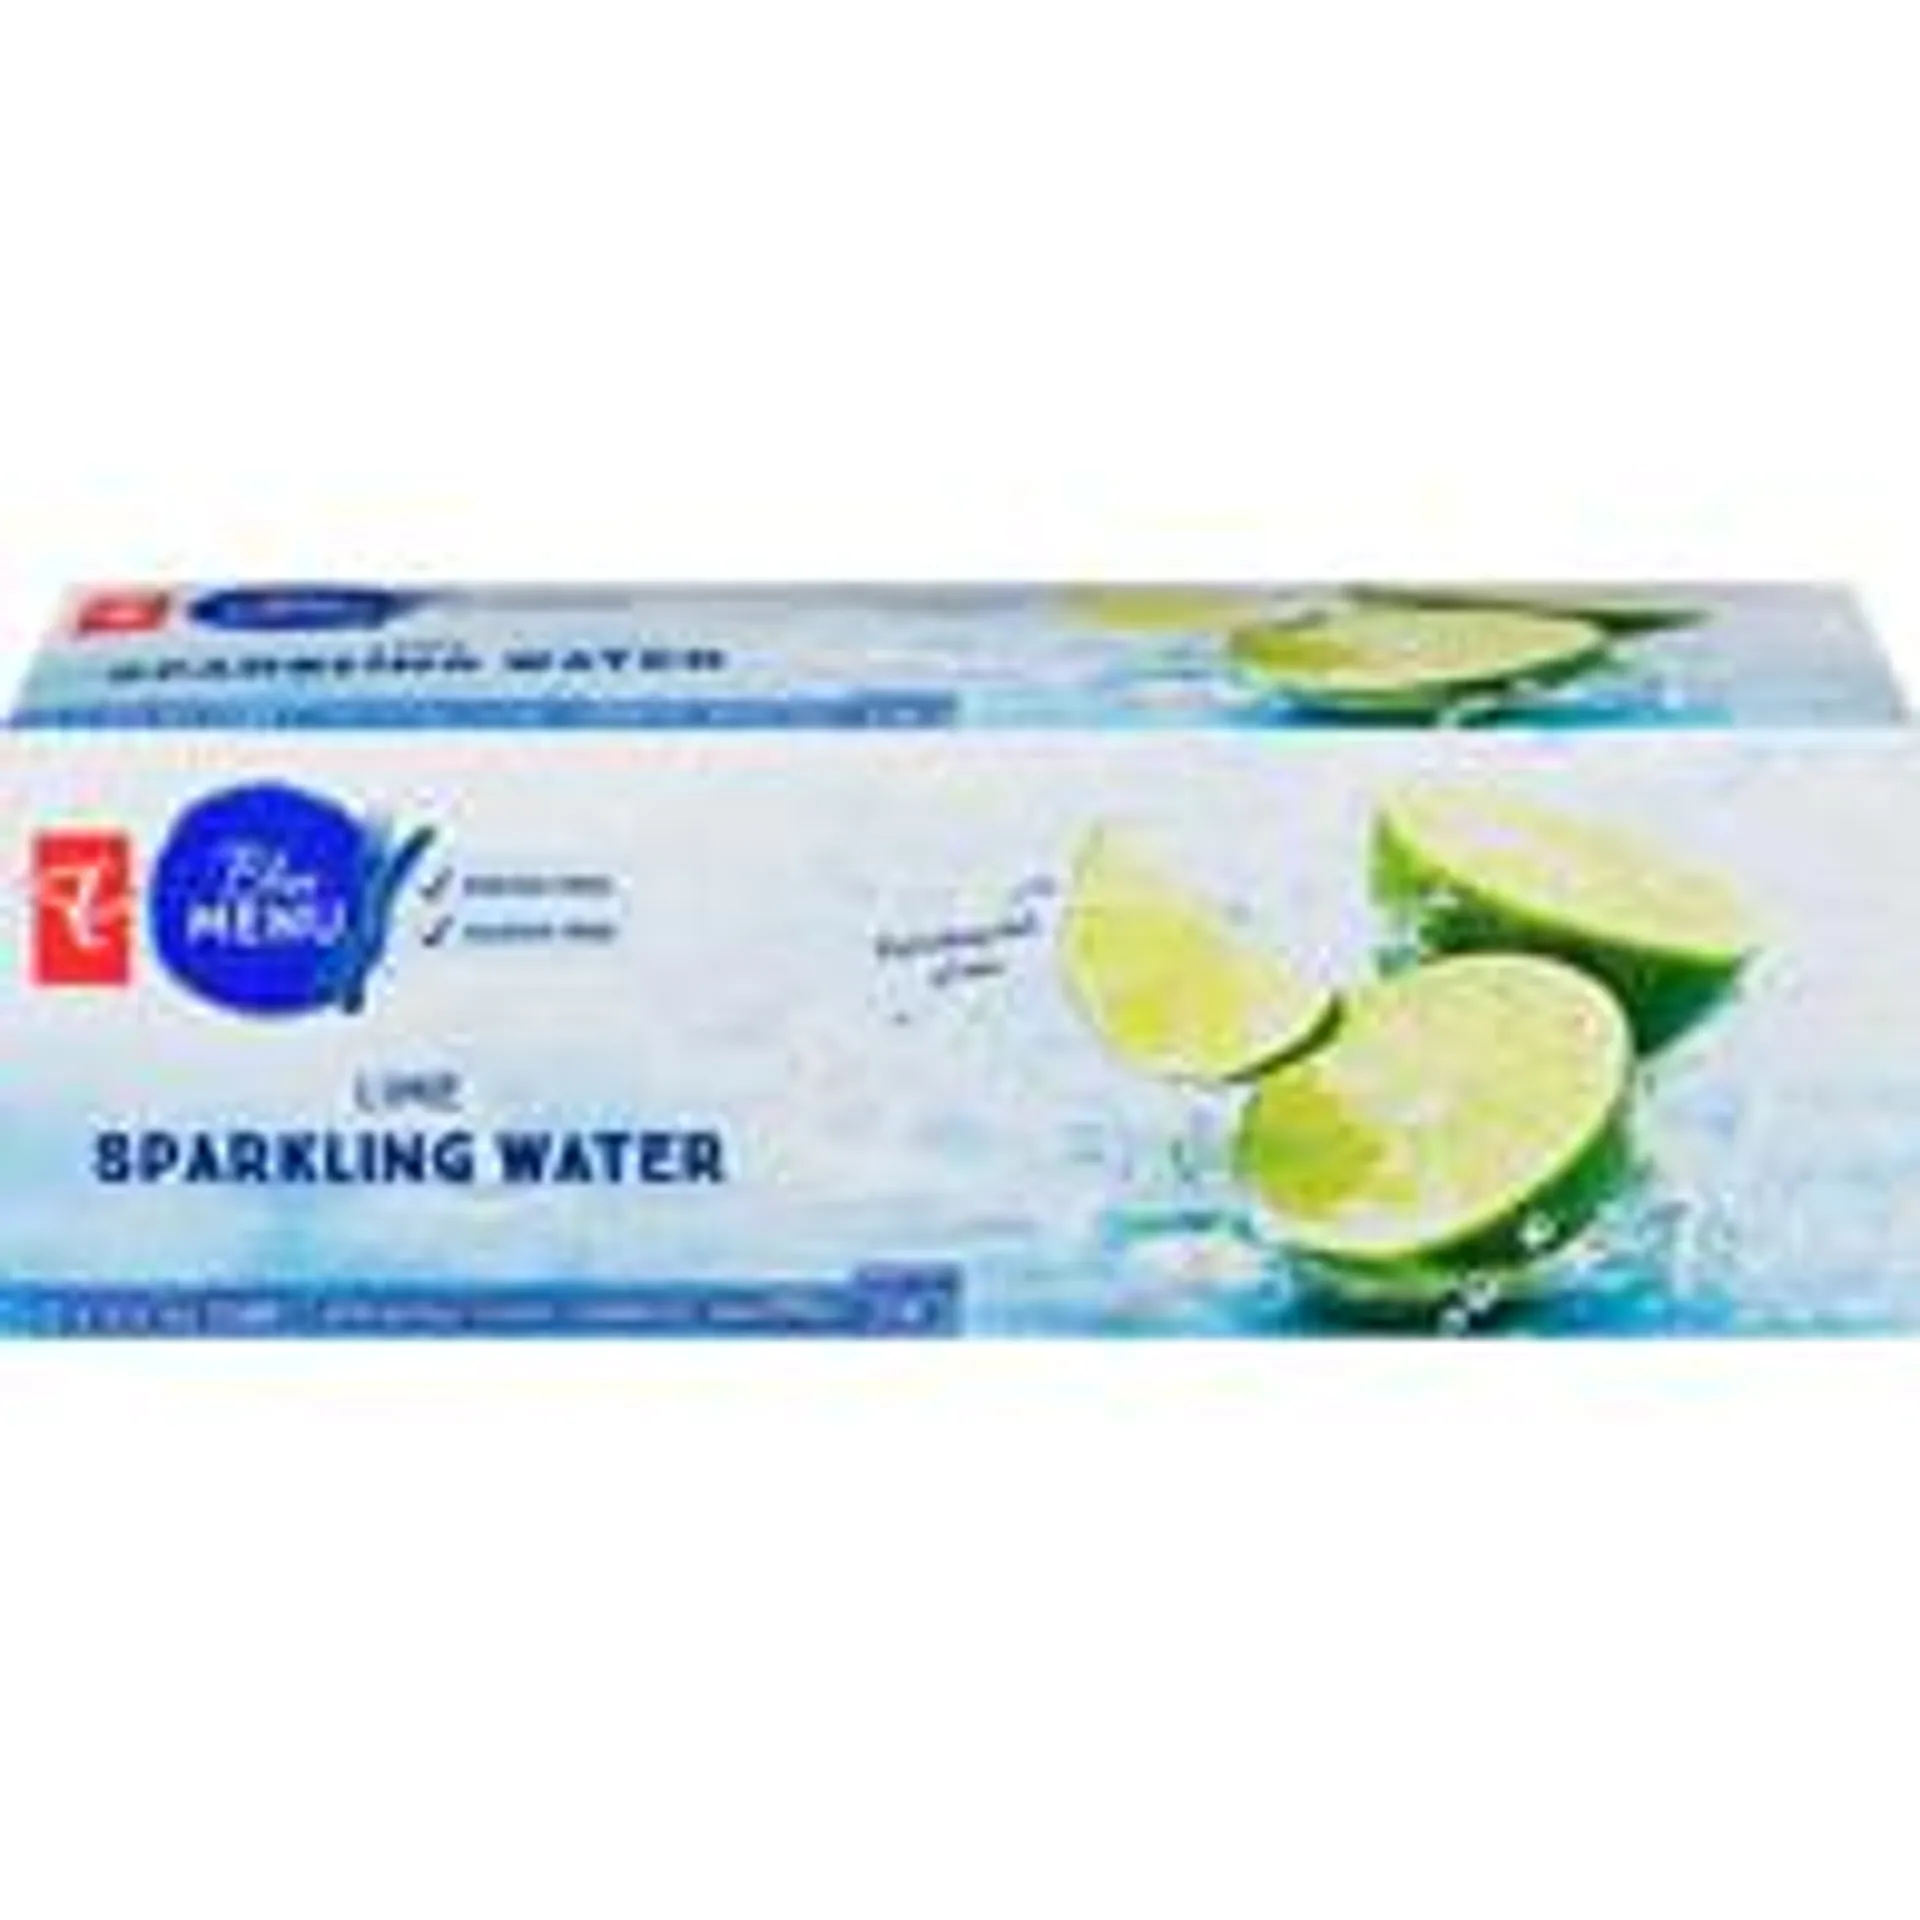 Lime Sparkling Water, 12-Pack